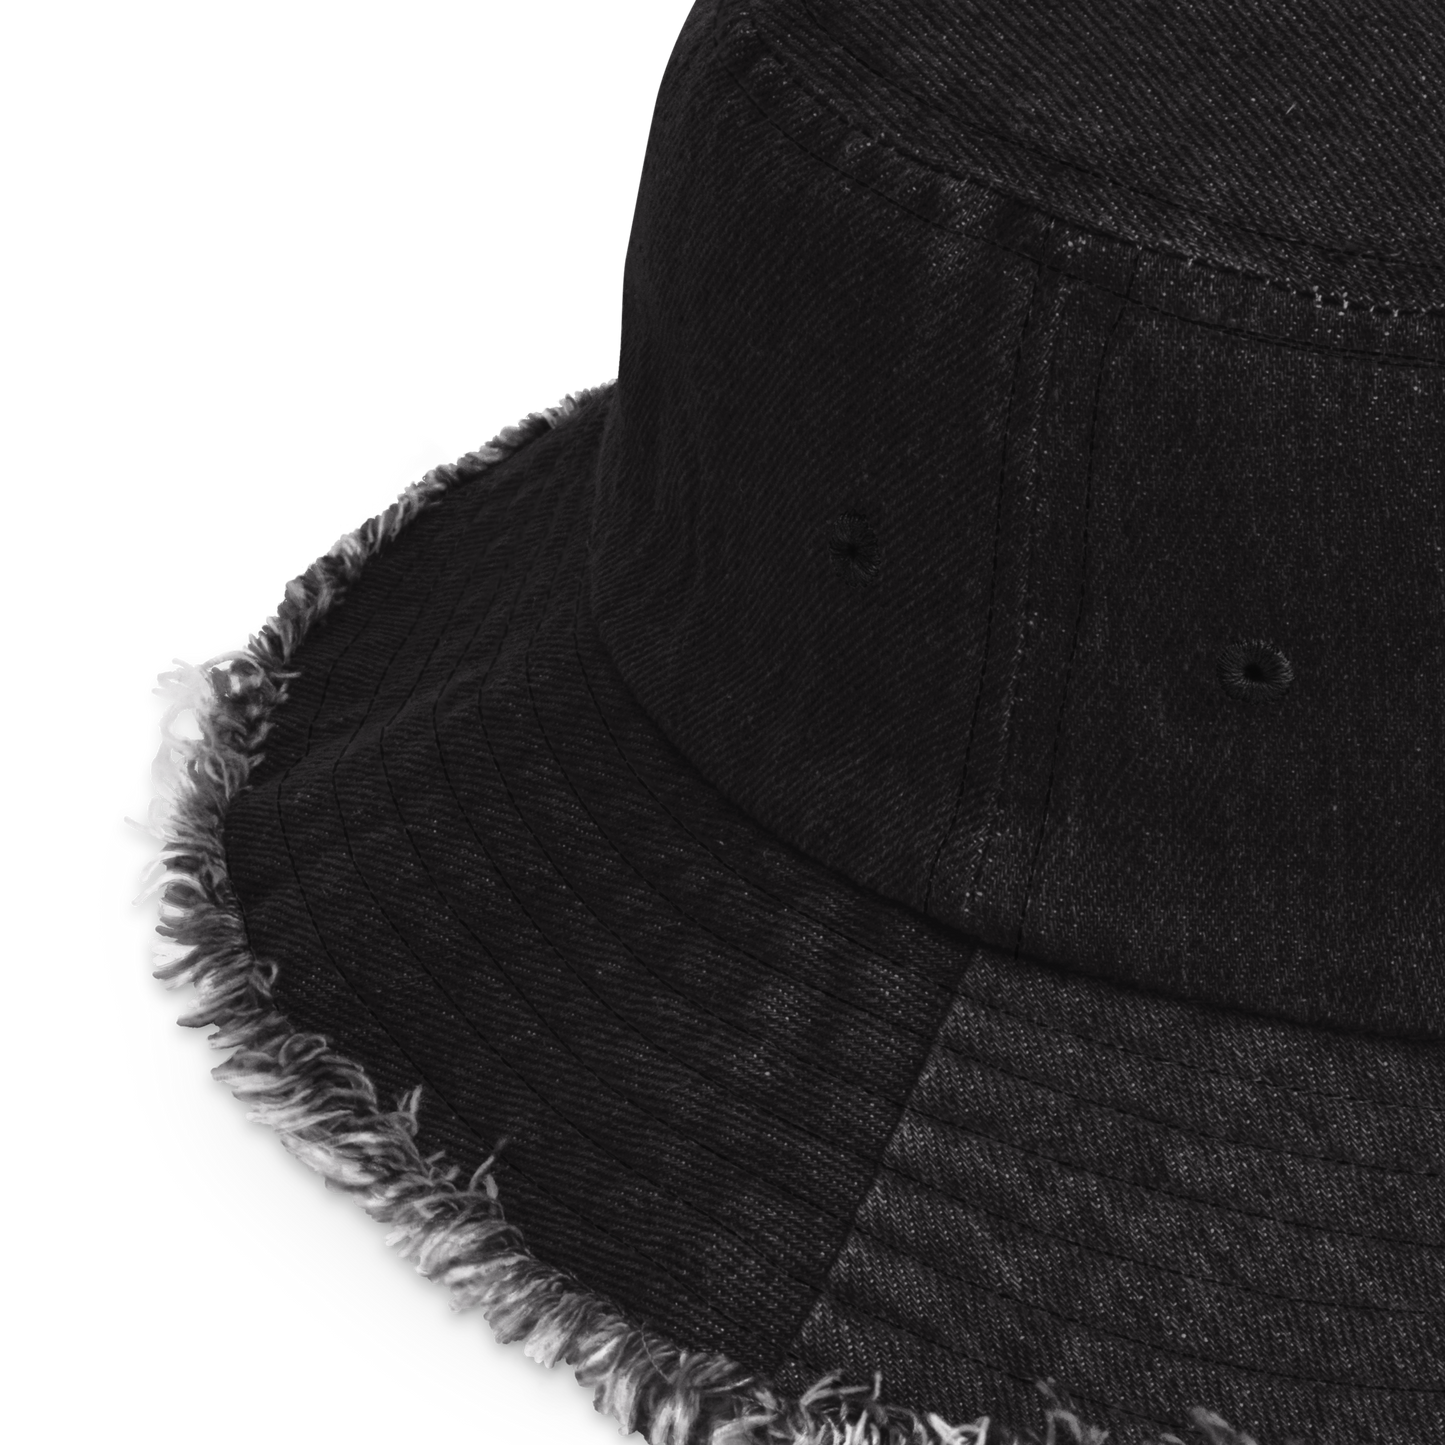 It's A Beautiful Day To Be Black Distressed Denim Bucket Hat